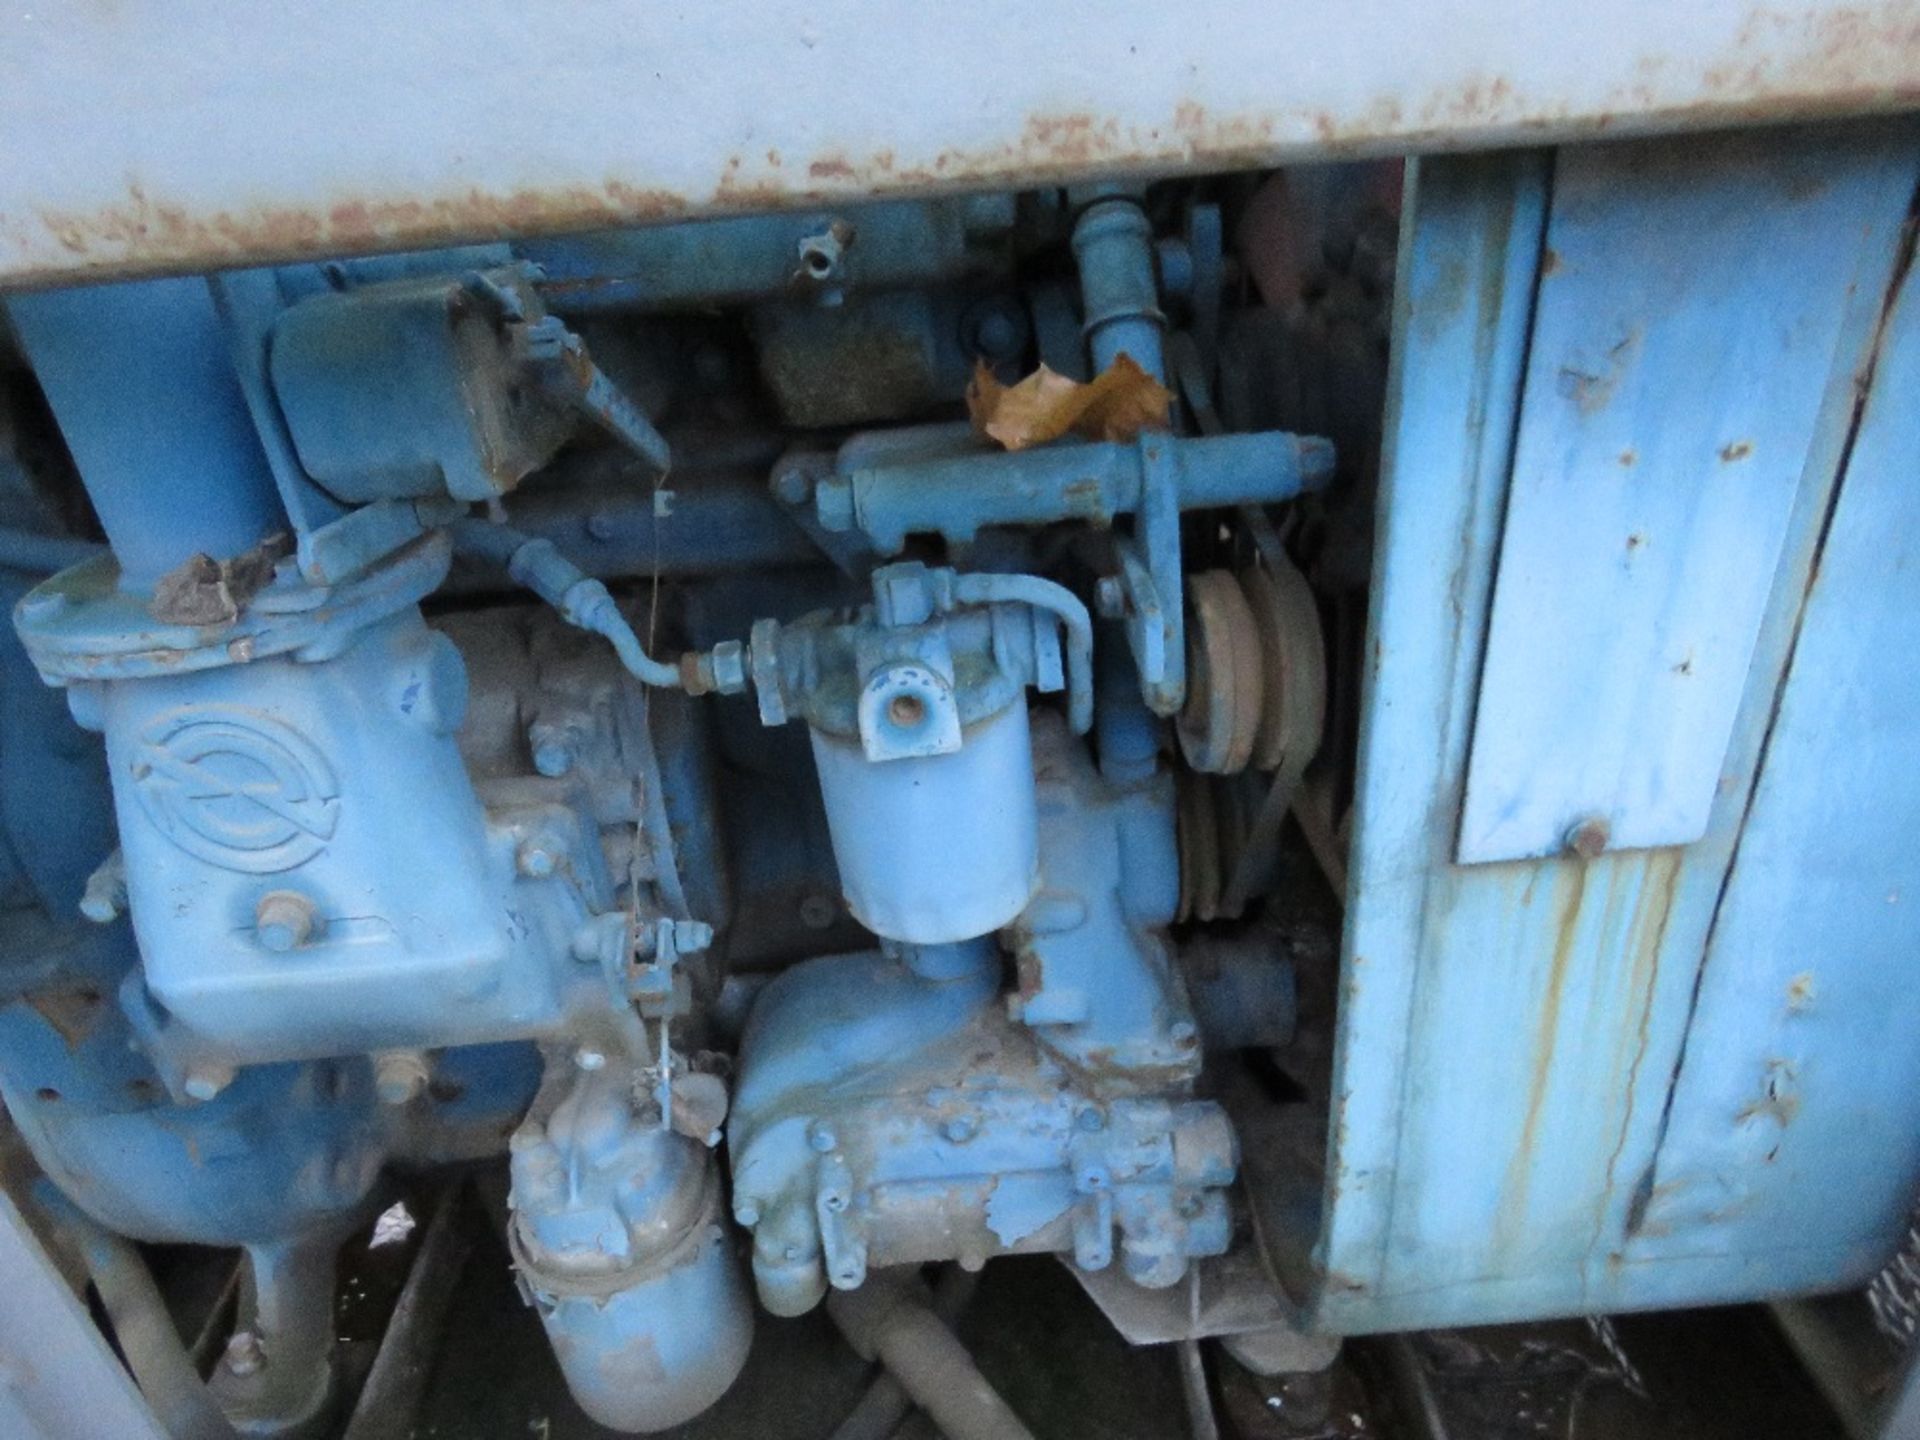 DETROIT DIESEL ENGINED POWER PACK ON SKID FRAME. DIRECT EX LOCAL BOAT YARD. - Image 4 of 6